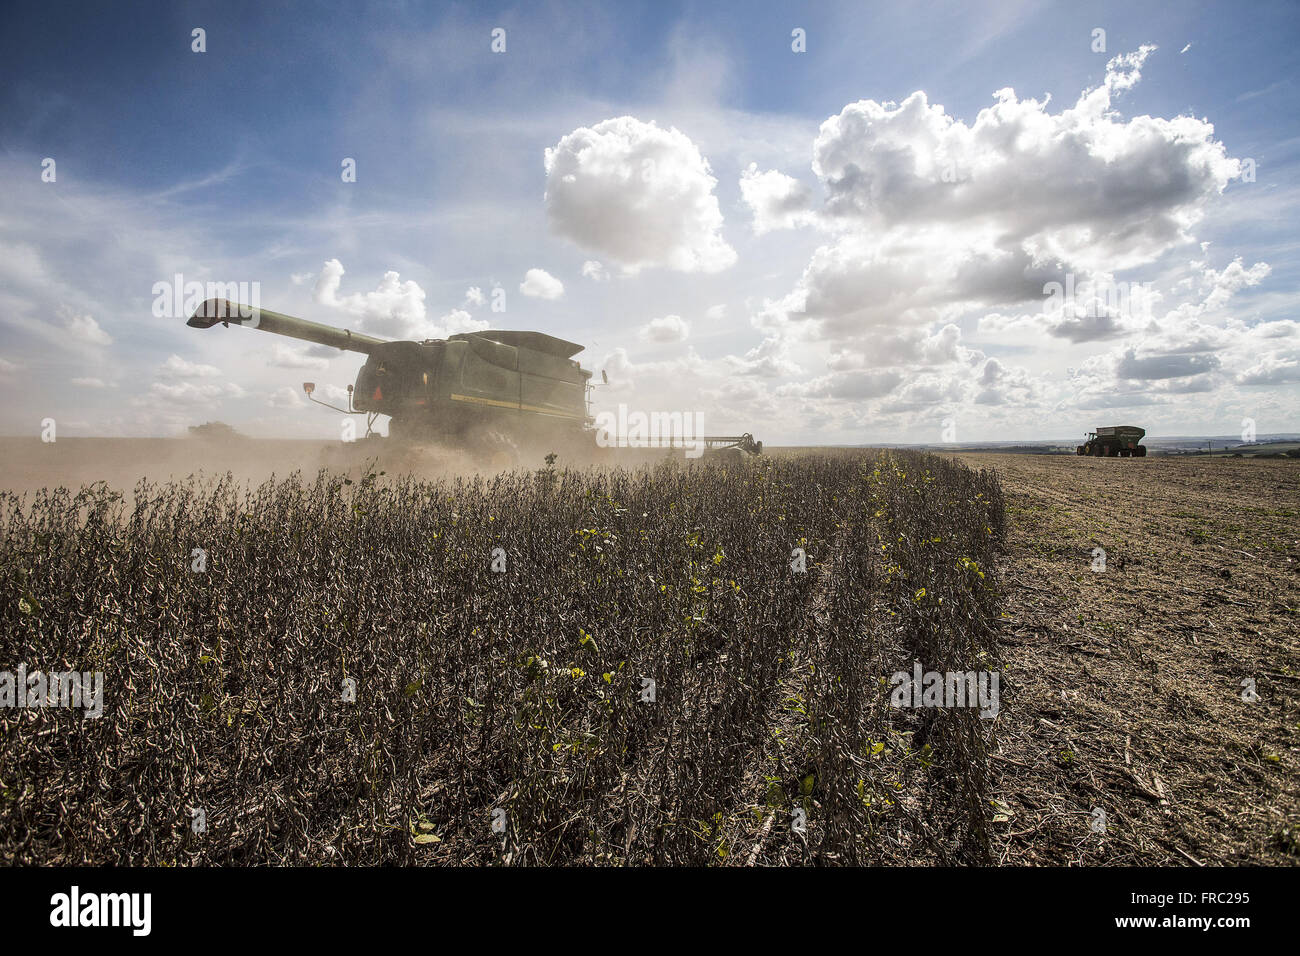 Pods of transgenic soybeans ready for harvest in the countryside - the harvester background Stock Photo